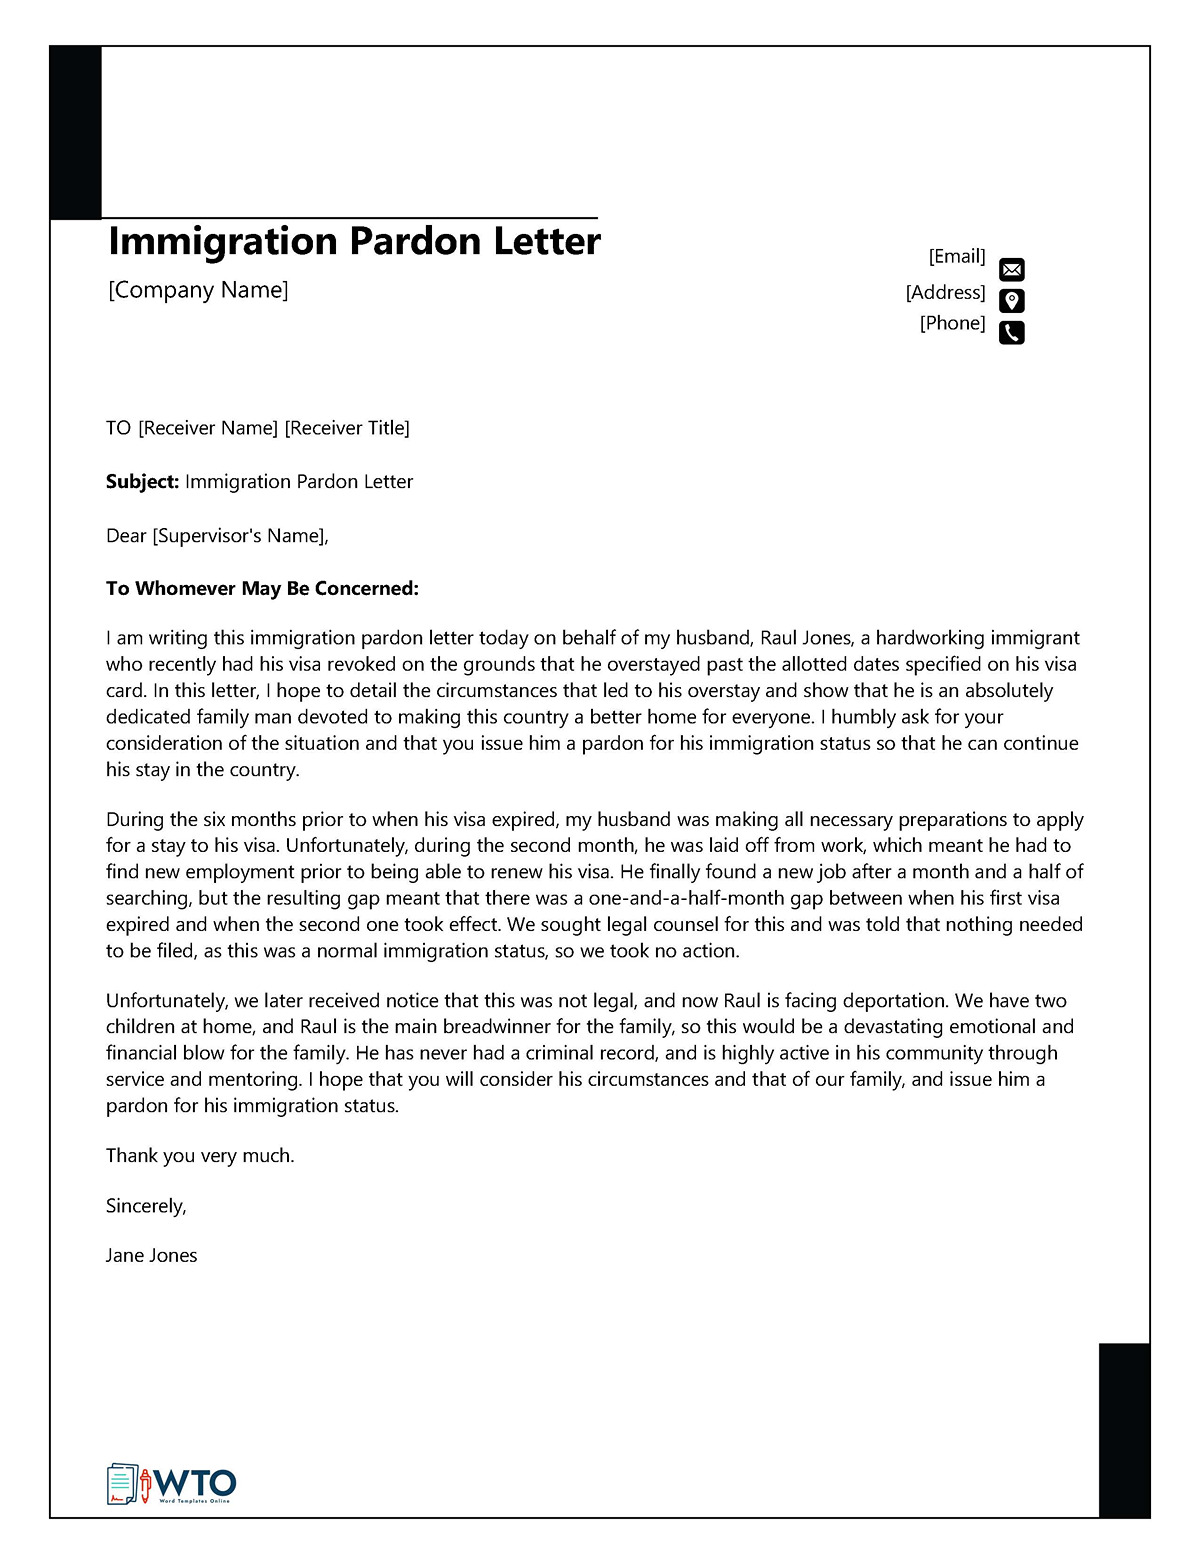 Free Immigration Pardon Letter Sample 03 for Word